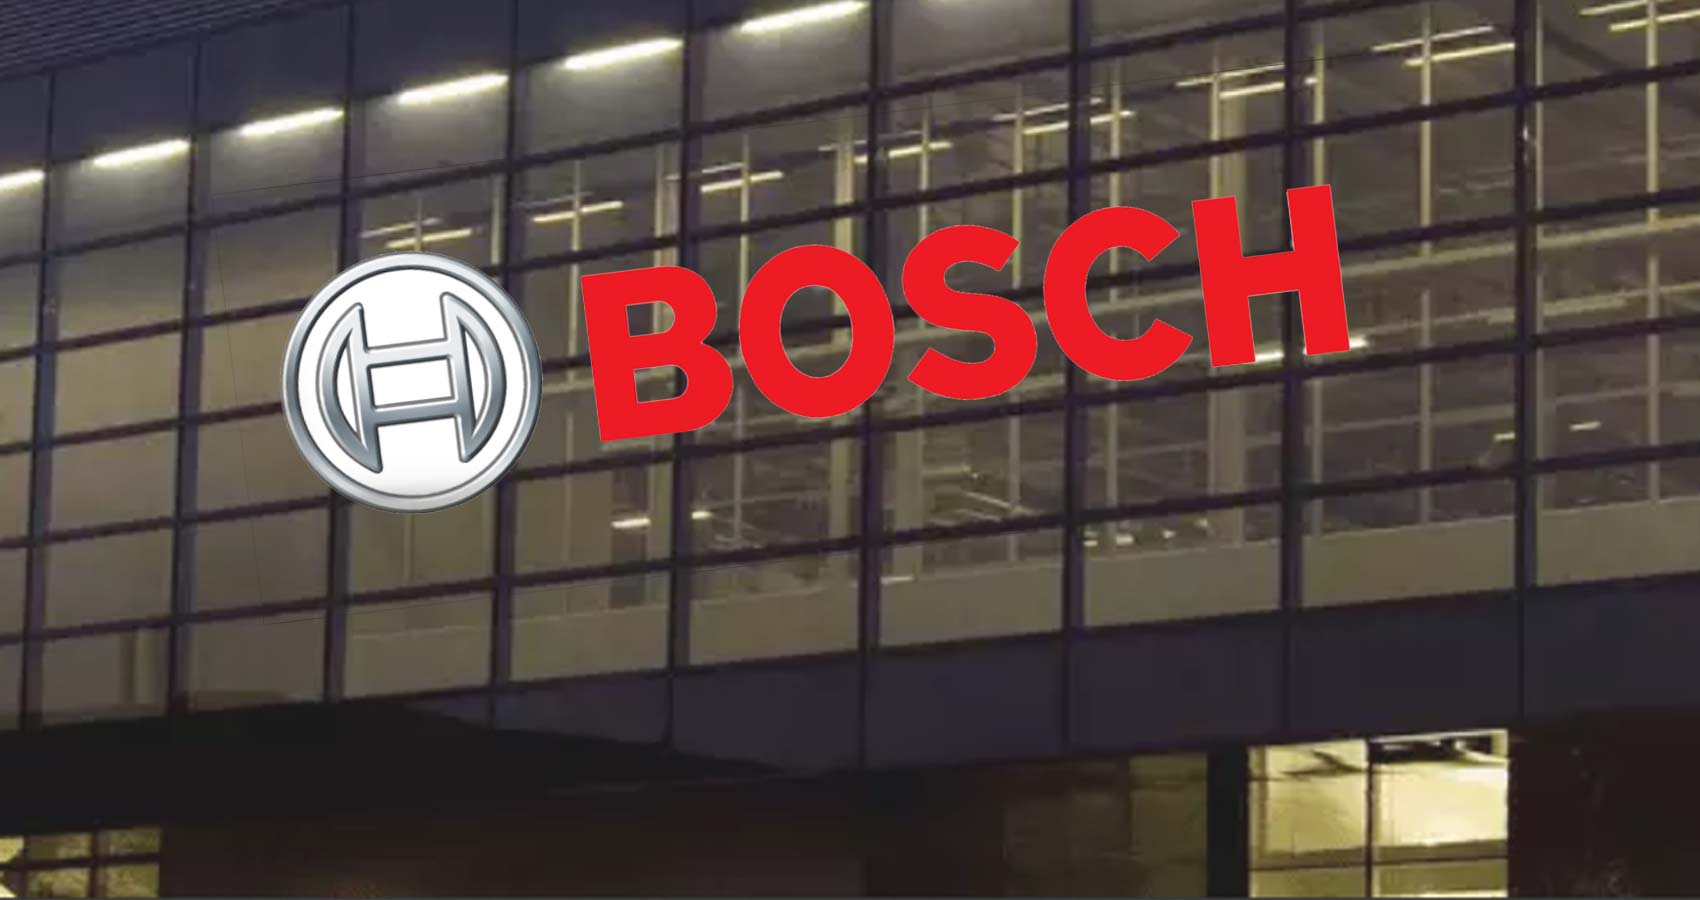 Bosch increased investment in hydrogen, starting fuel-cell power module production